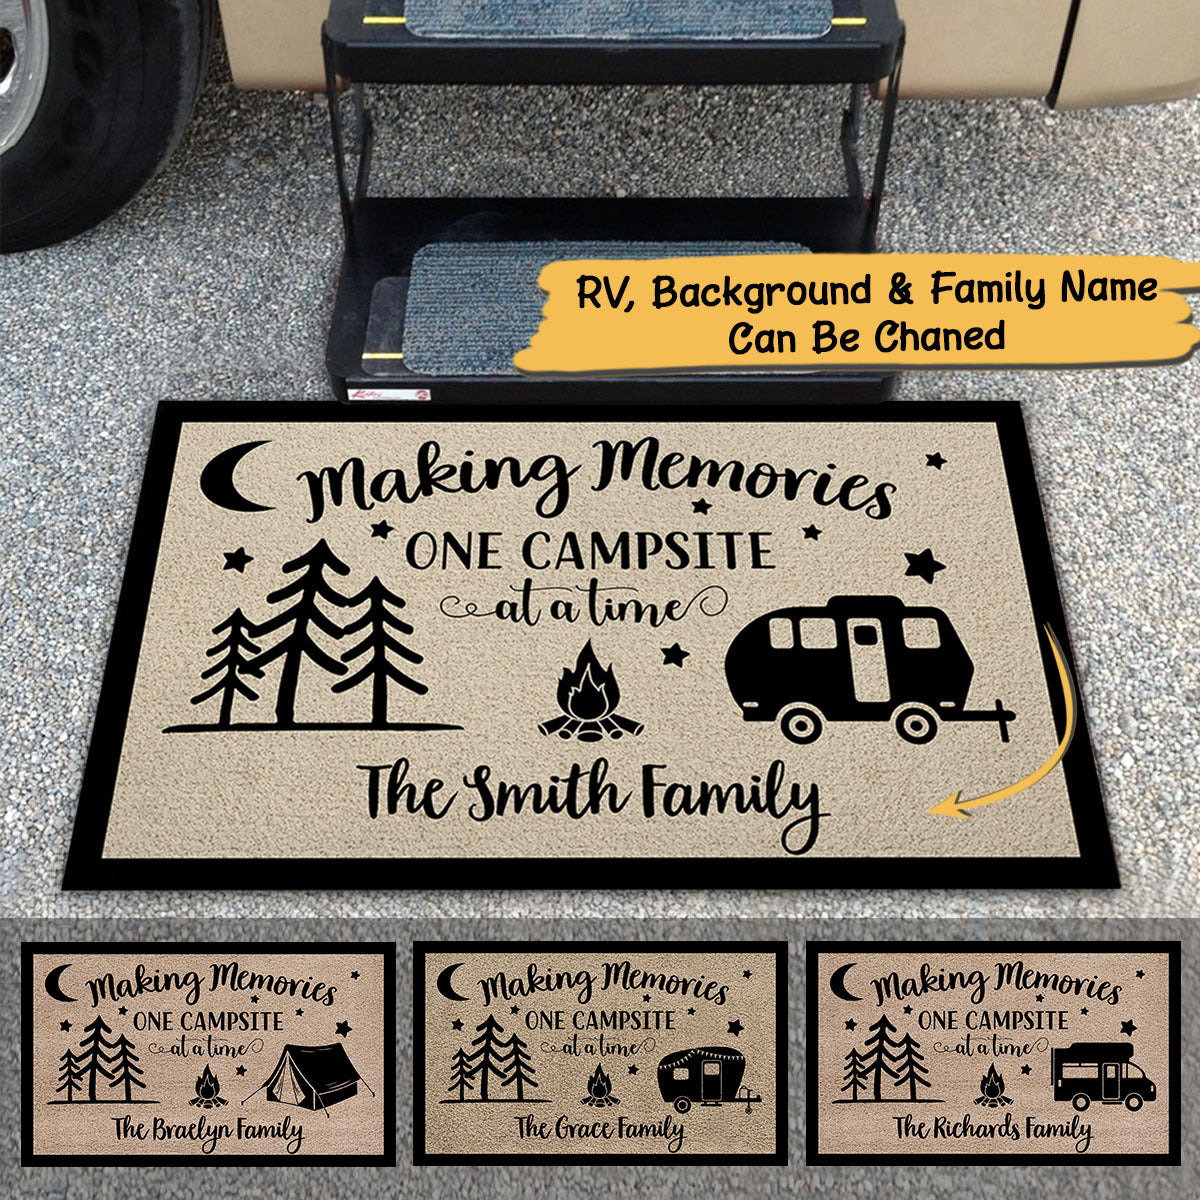 Camping Doormat - Making Memories One Campsite At a Time Vr2 M0402 - TRHN